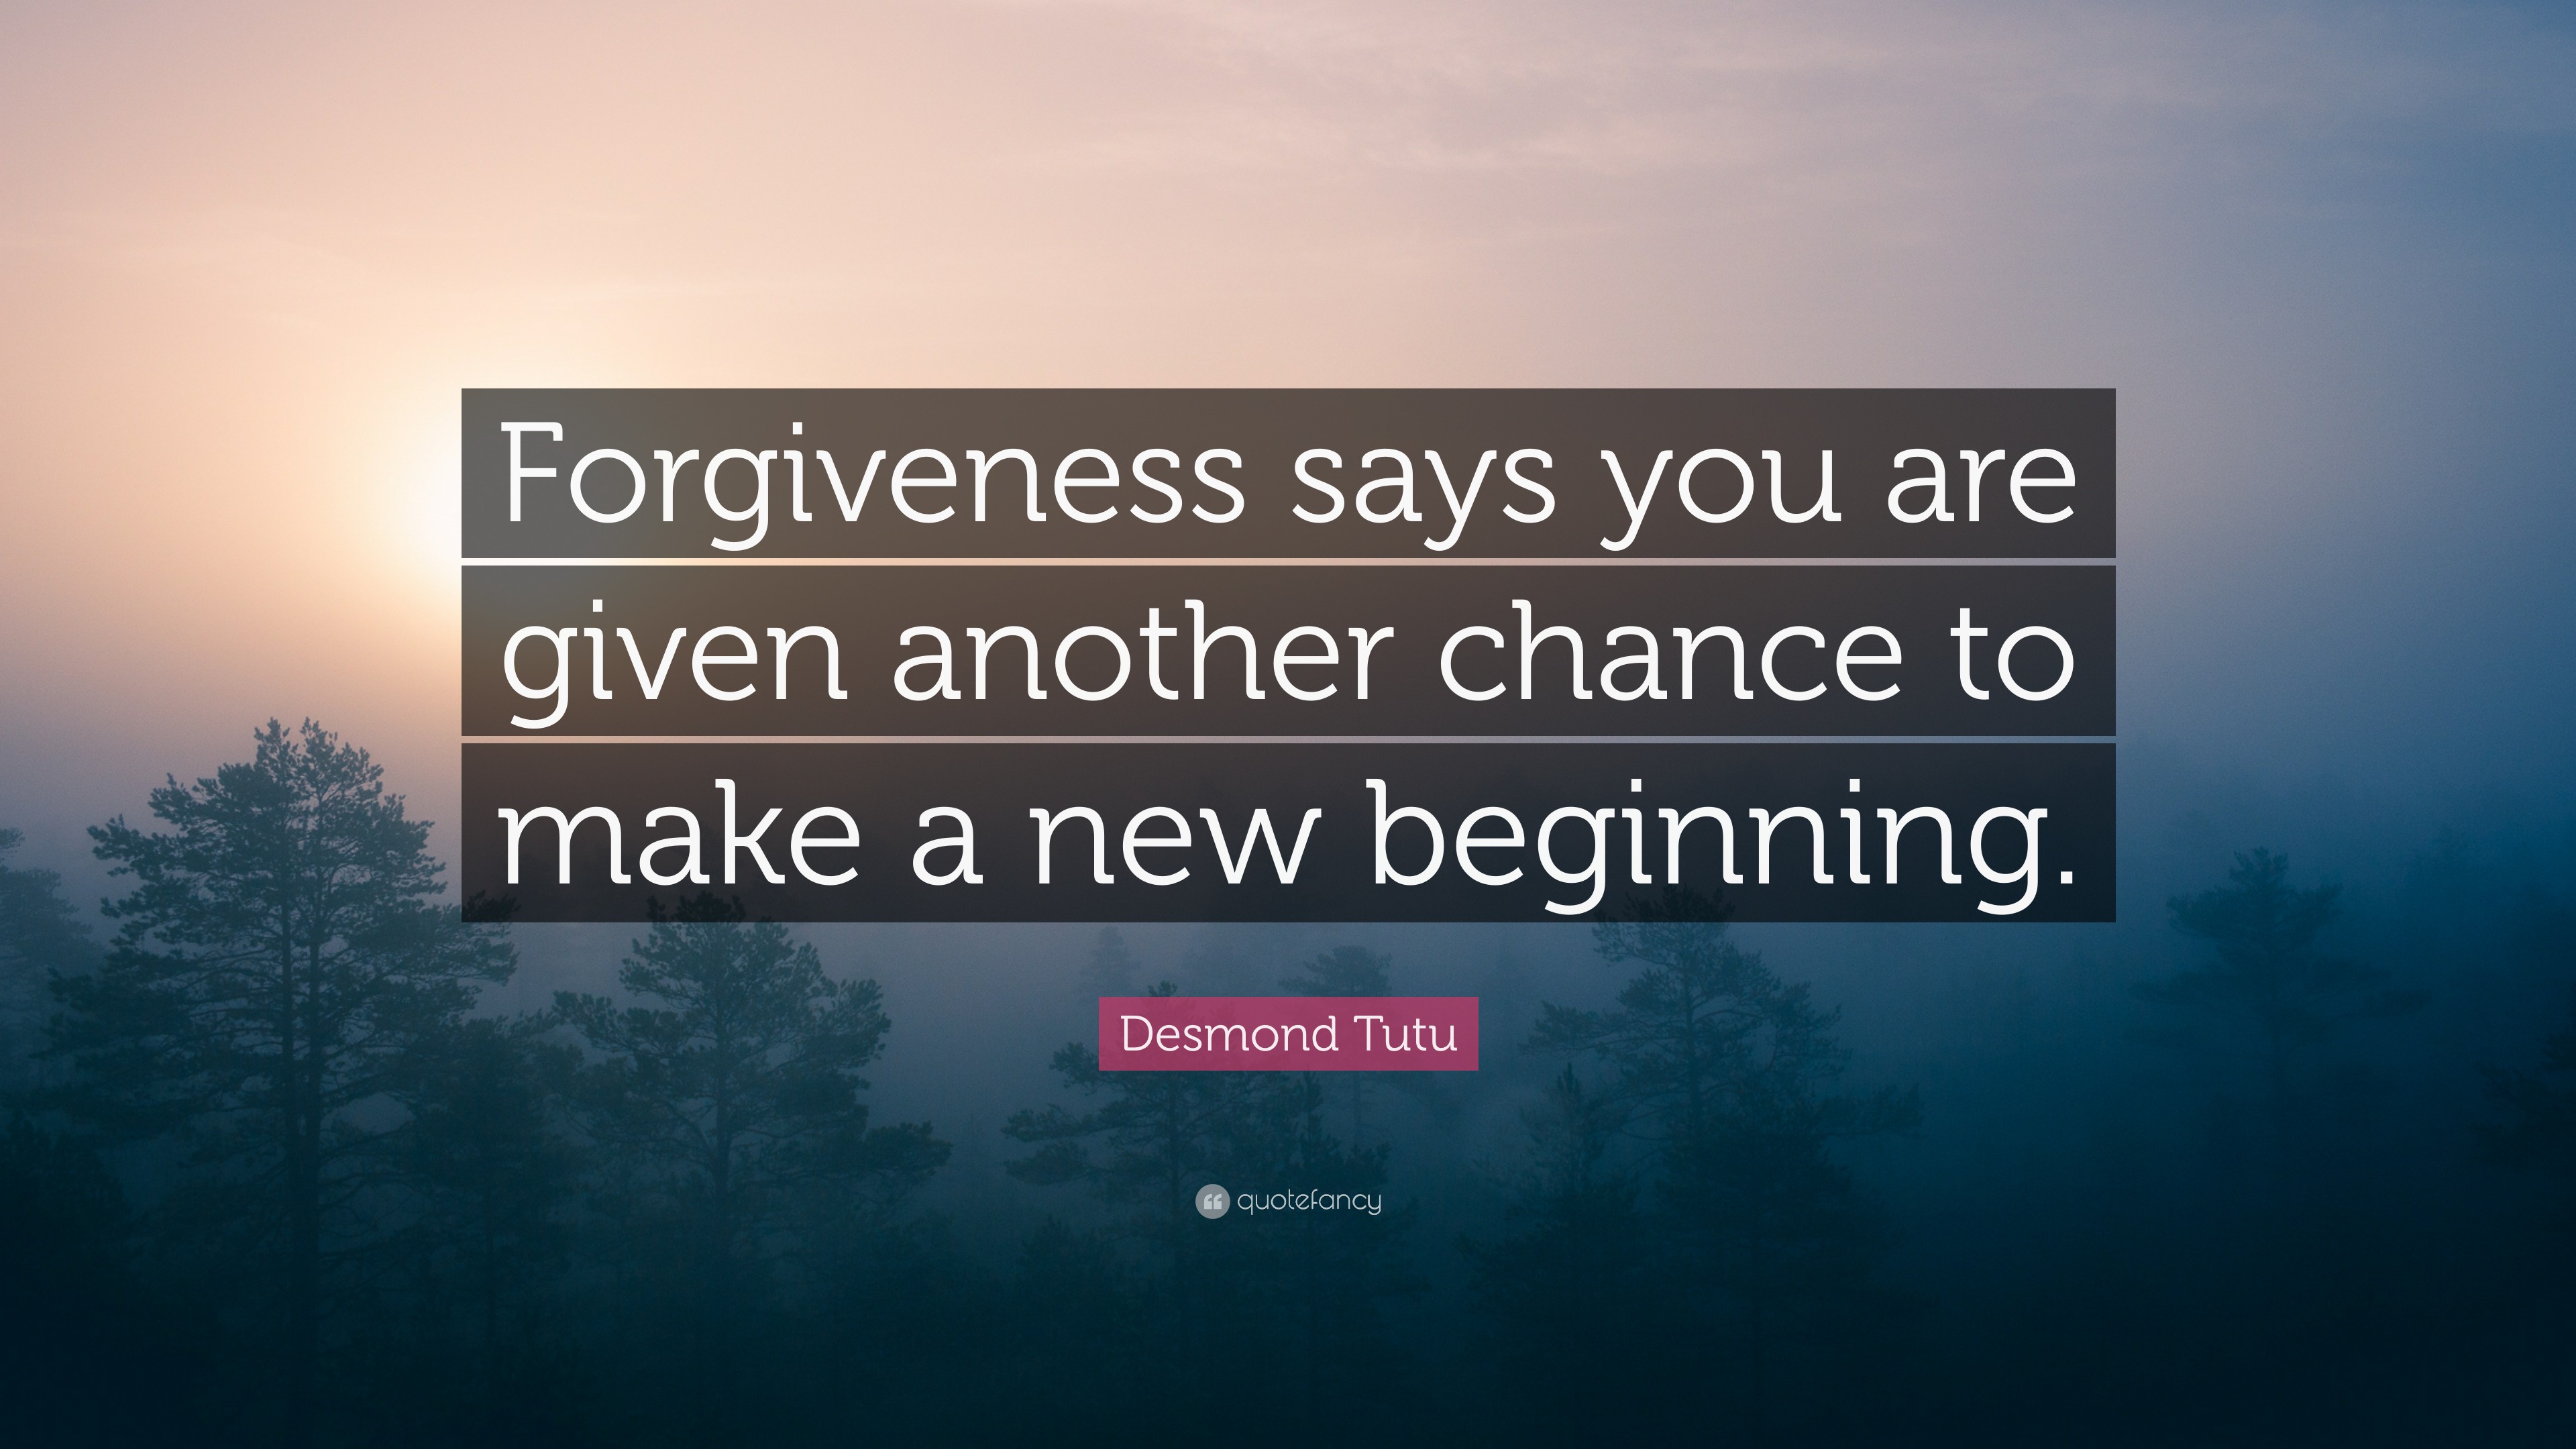 Desmond Tutu Quote: “Forgiveness says you are given another chance to ...